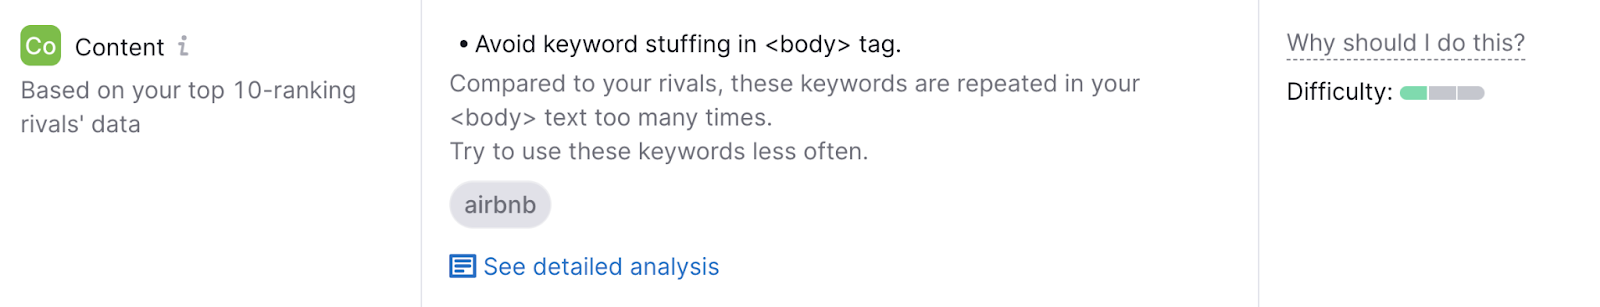 "Avoid keyword stuffing in <body> tag." recommendation